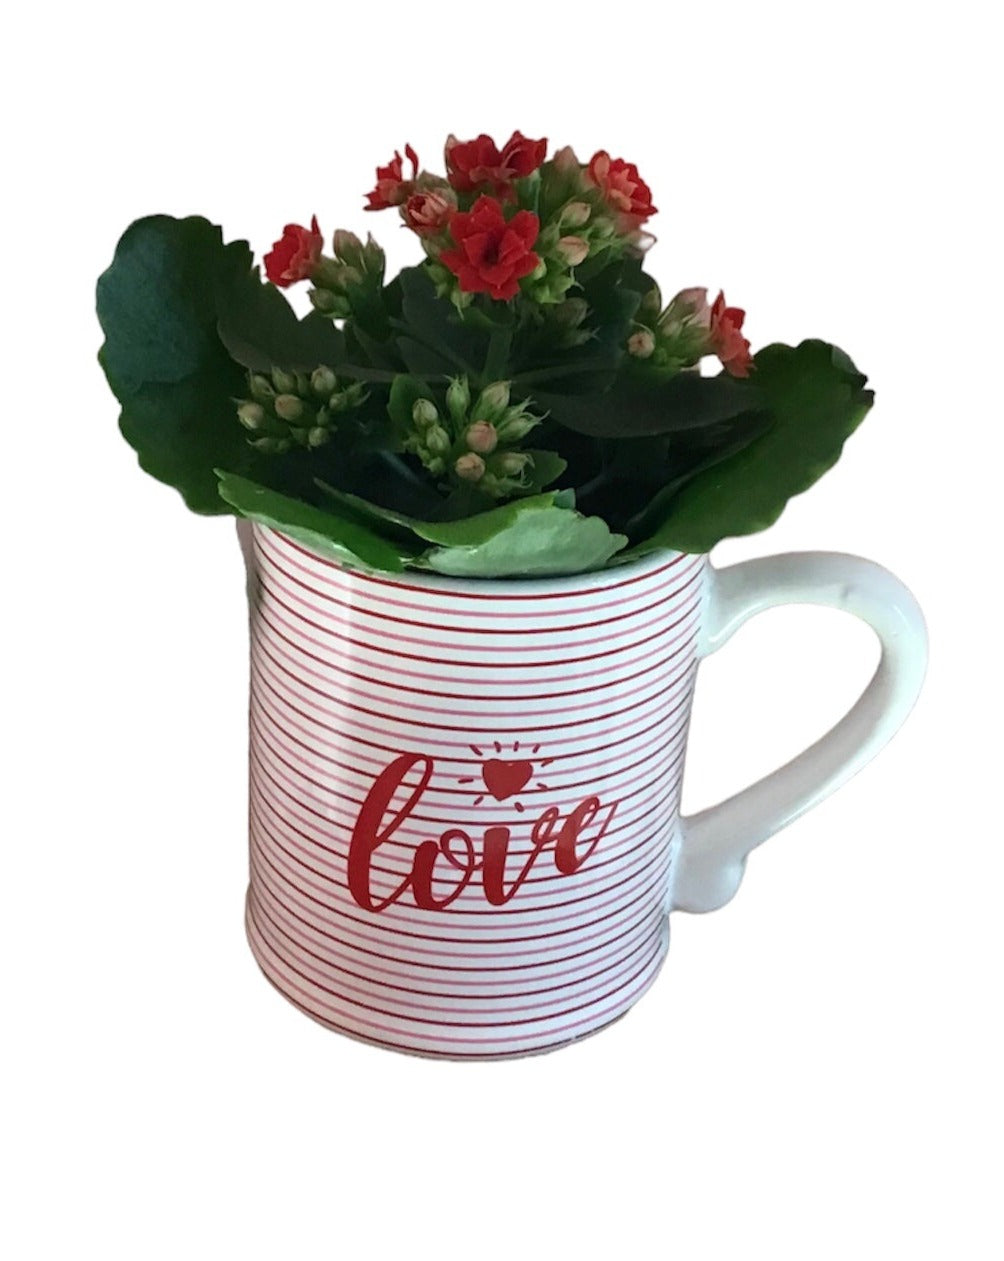 Love in Bloom Cup - Kalanchoe Plant